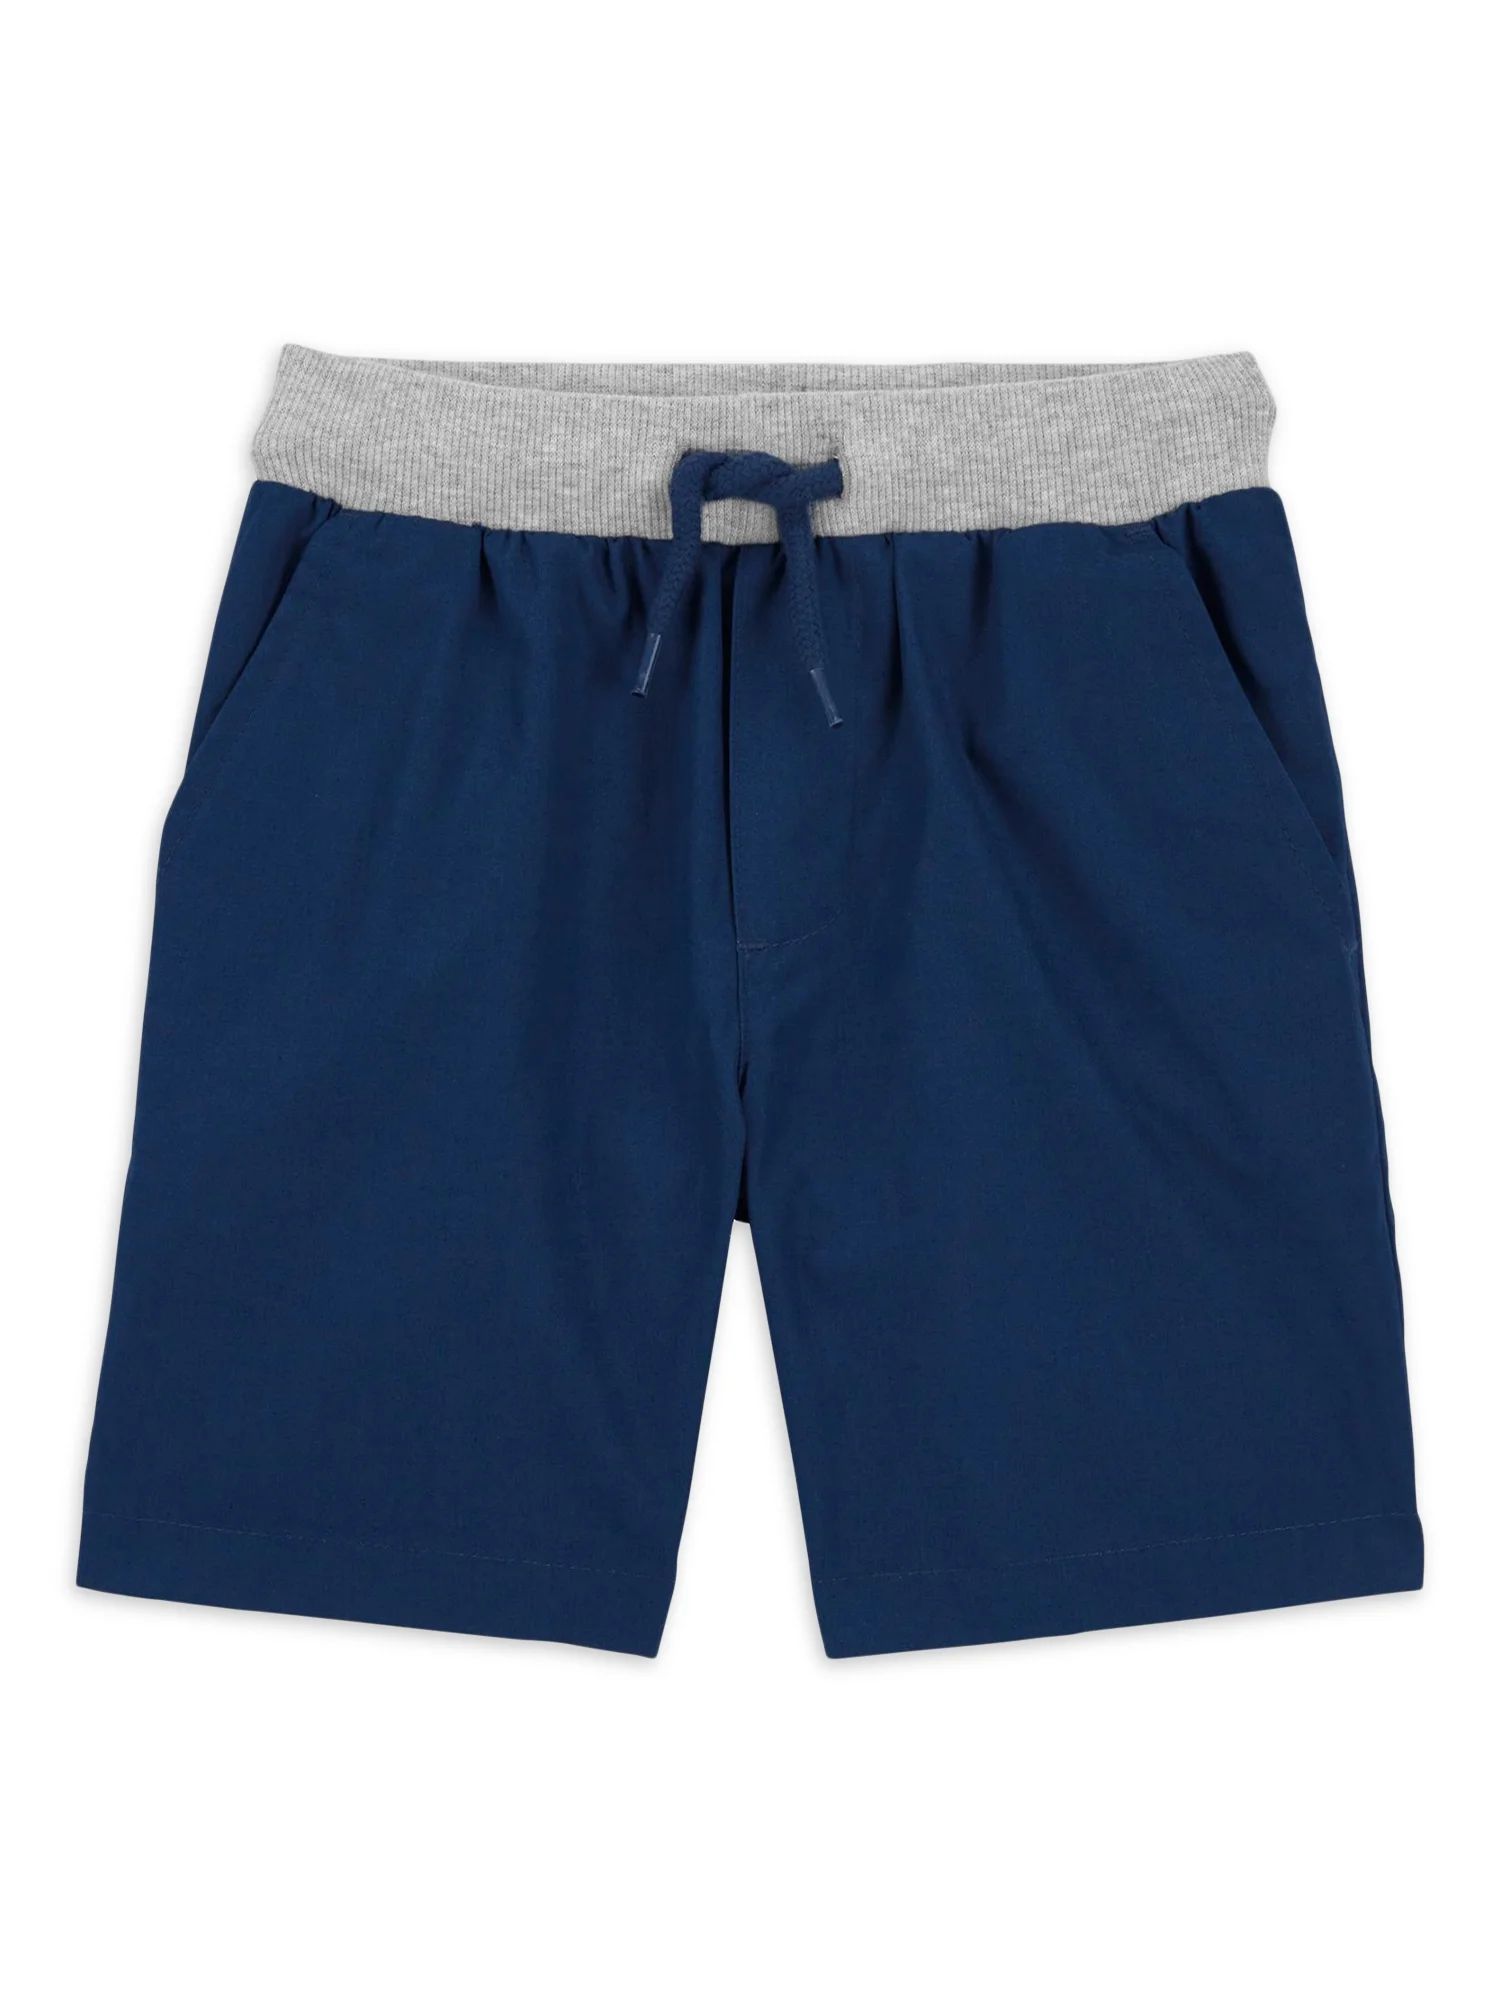 Carter's Child of Mine Toddler Boy Shorts, One-Pack, Sizes 12M-5T | Walmart (US)